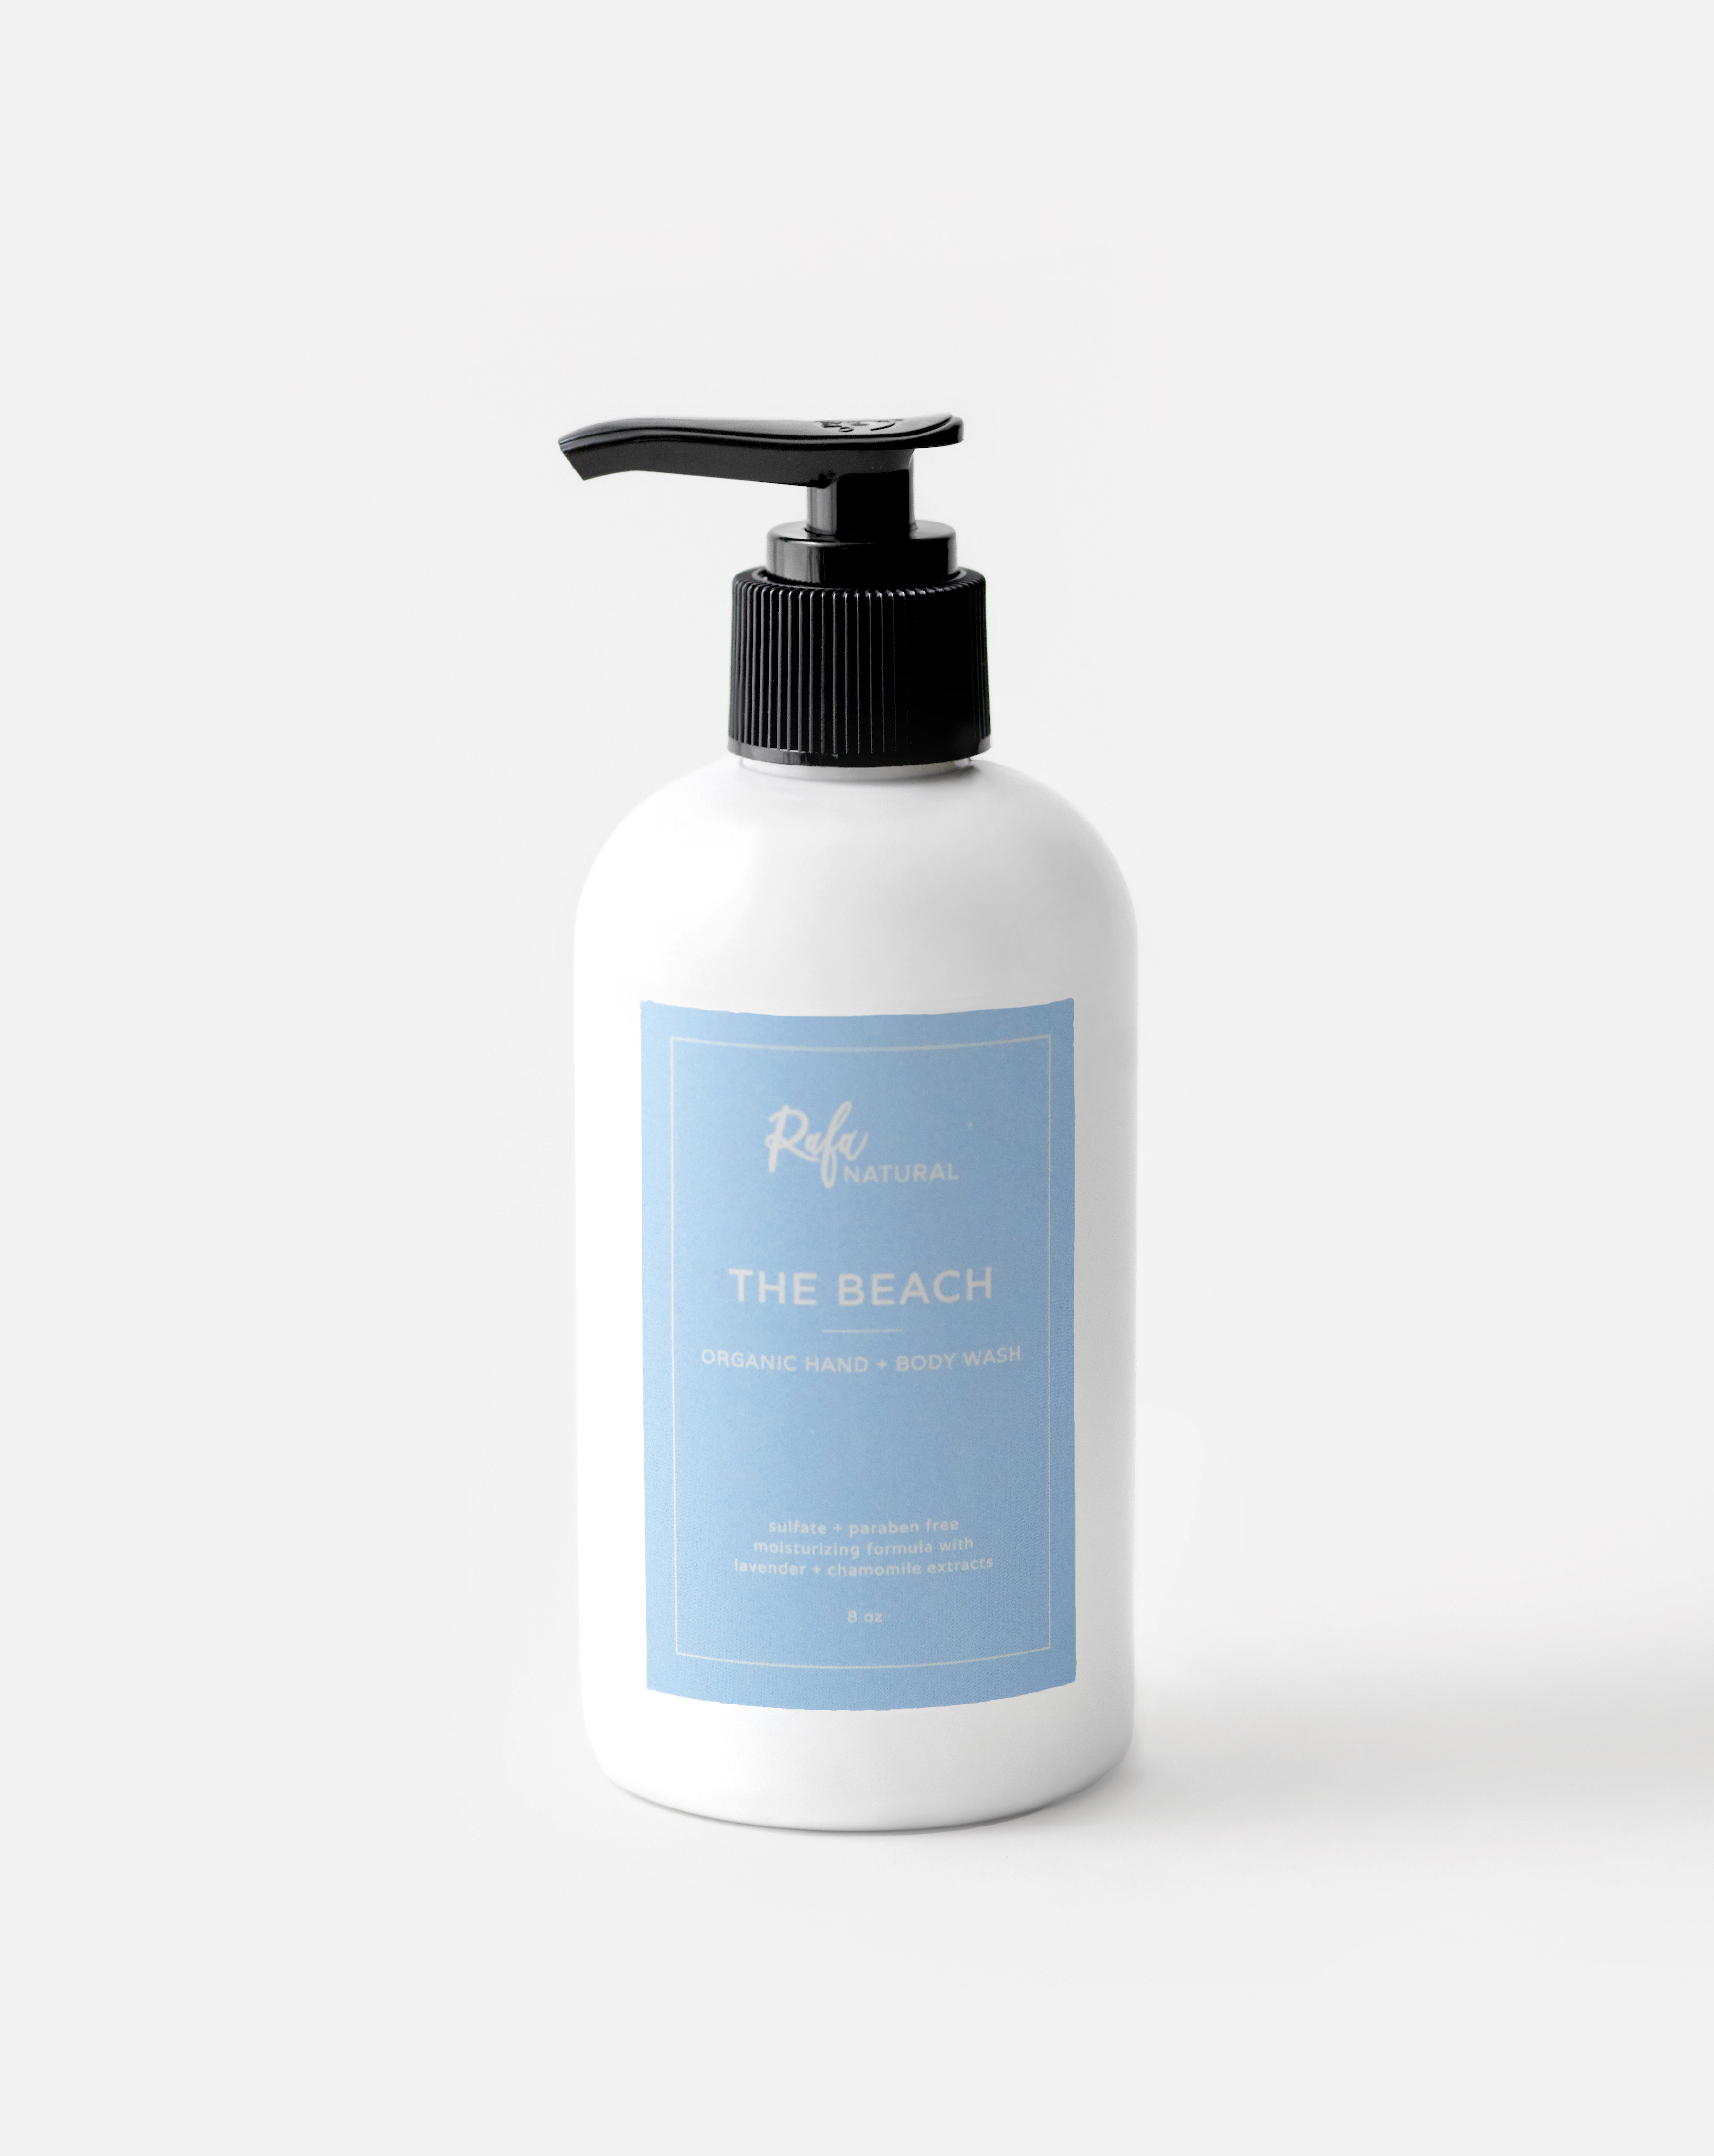 Philosophy Pure Grace Perfumed Body Lotion - Reviews